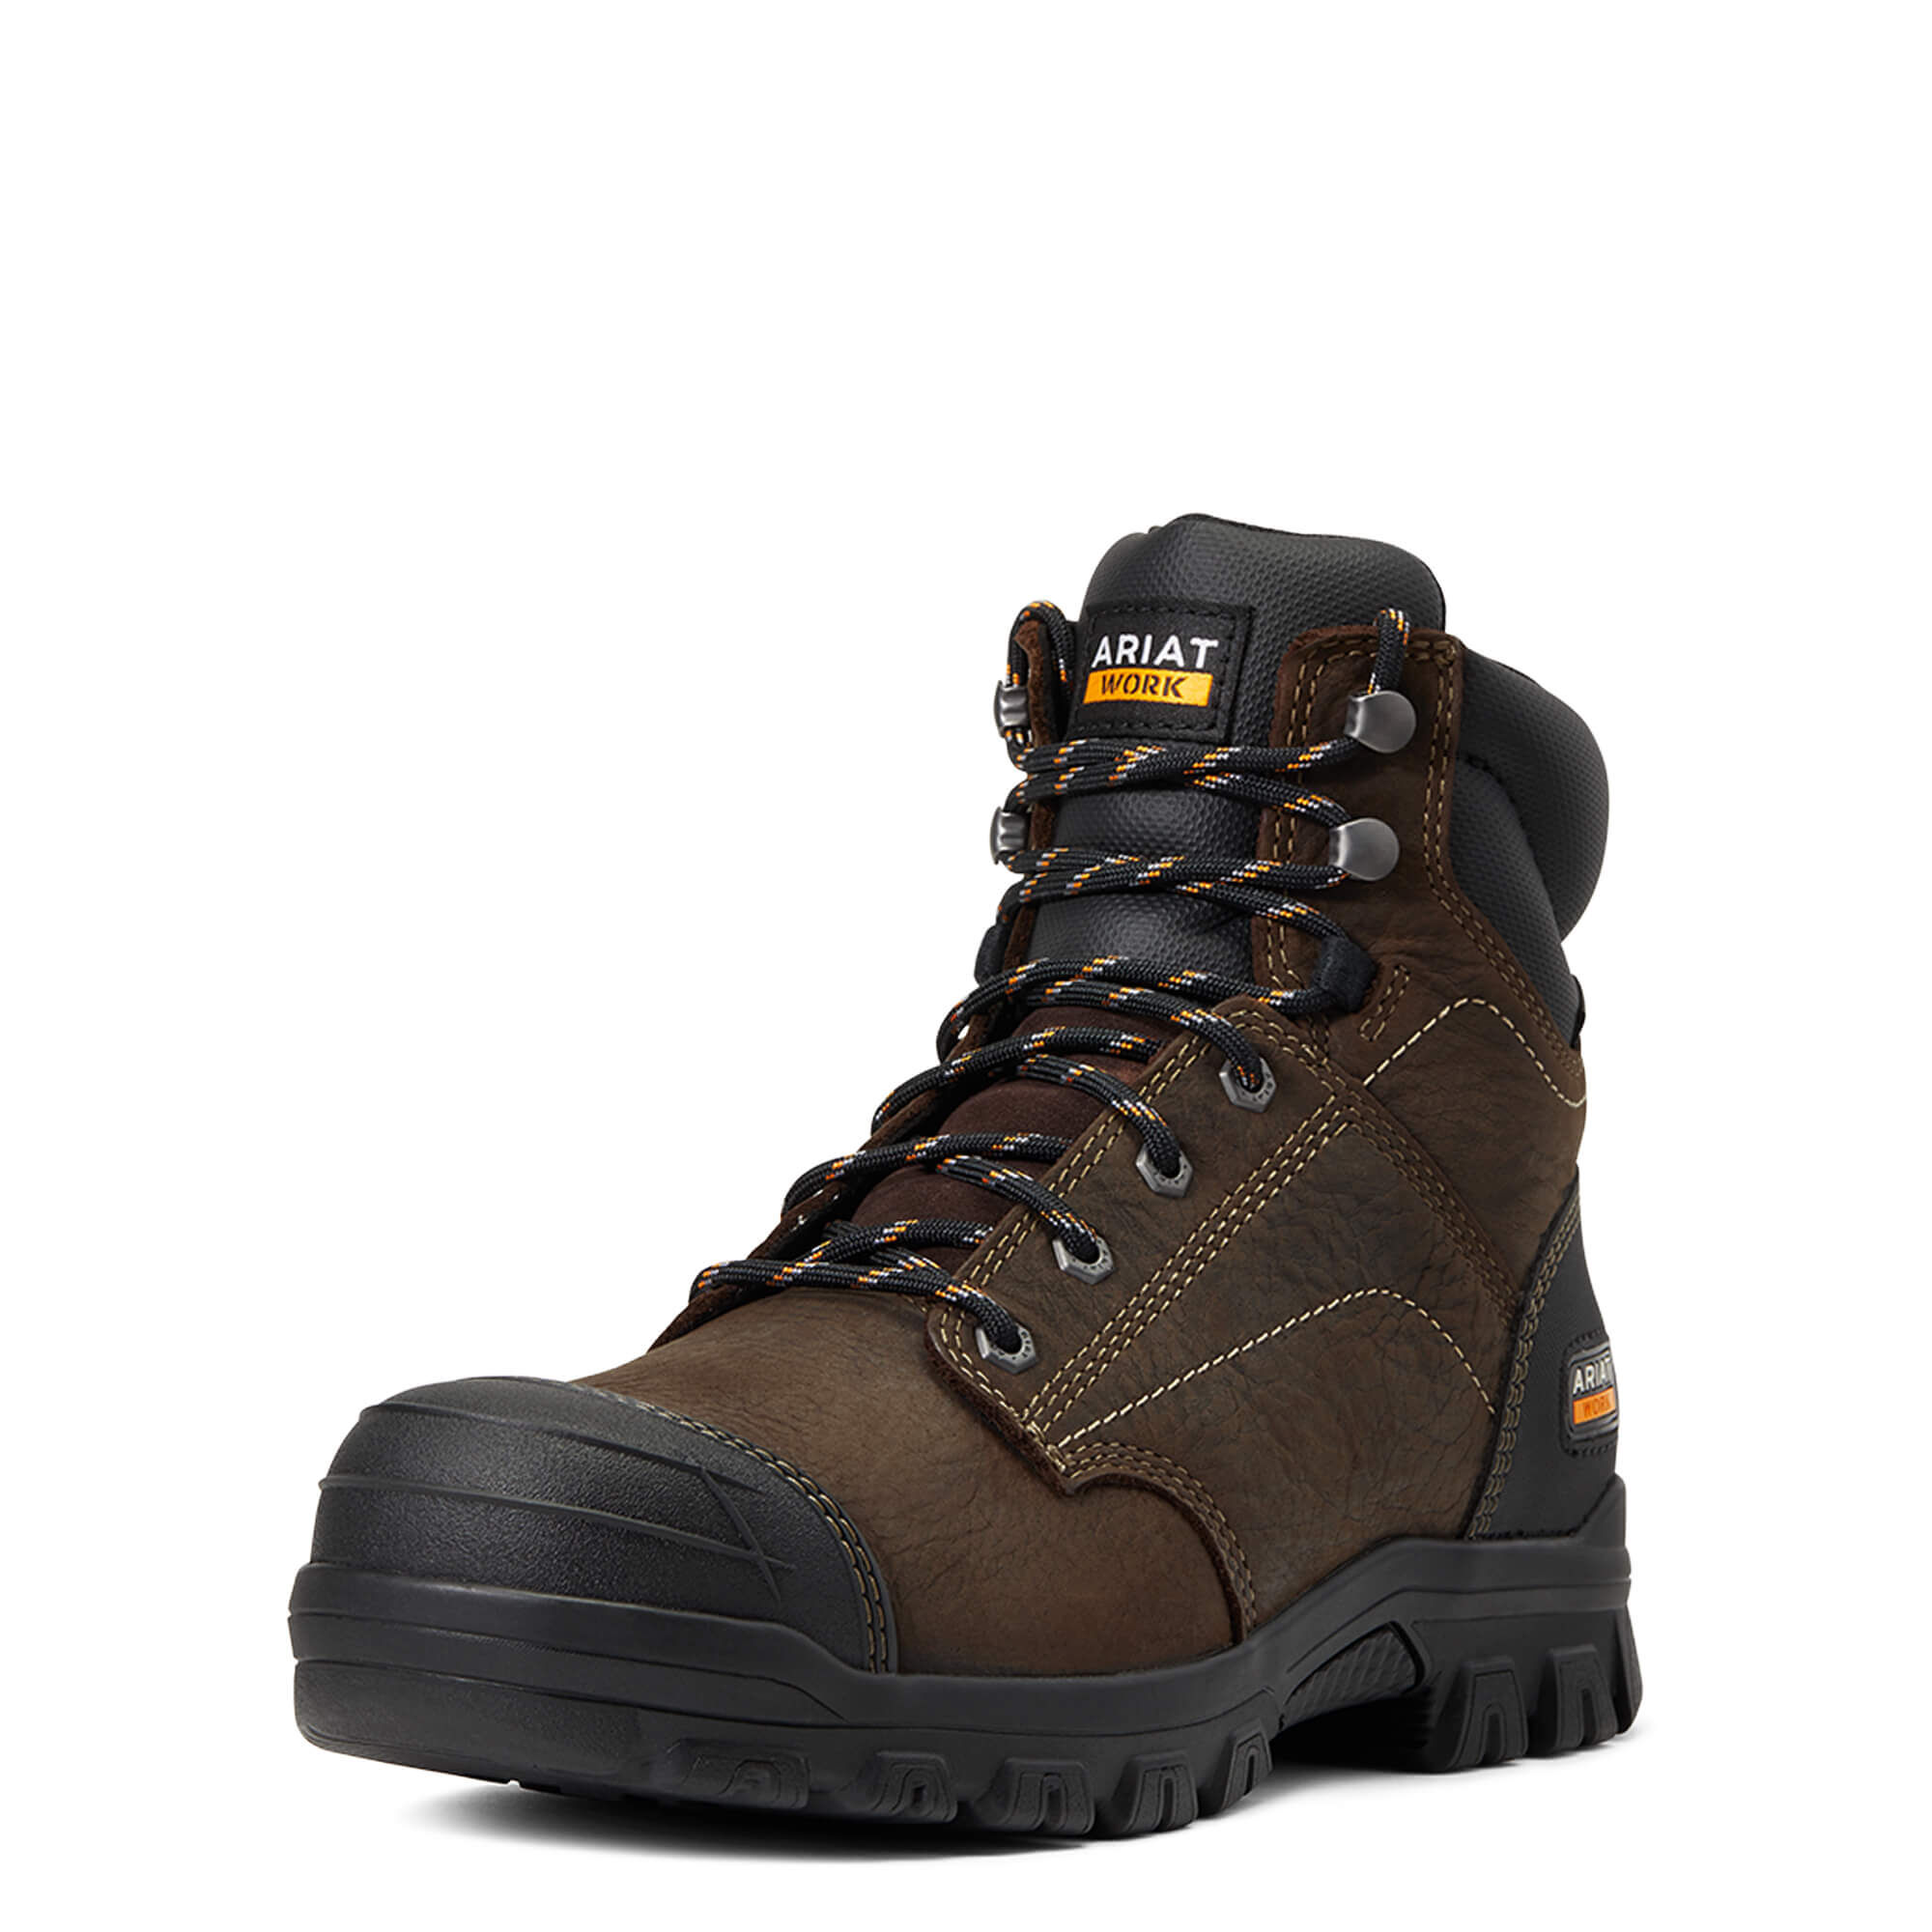 Pro Tradesman Farmers Mechanics Builders Brown Leather Dealer Work Safety Boots 